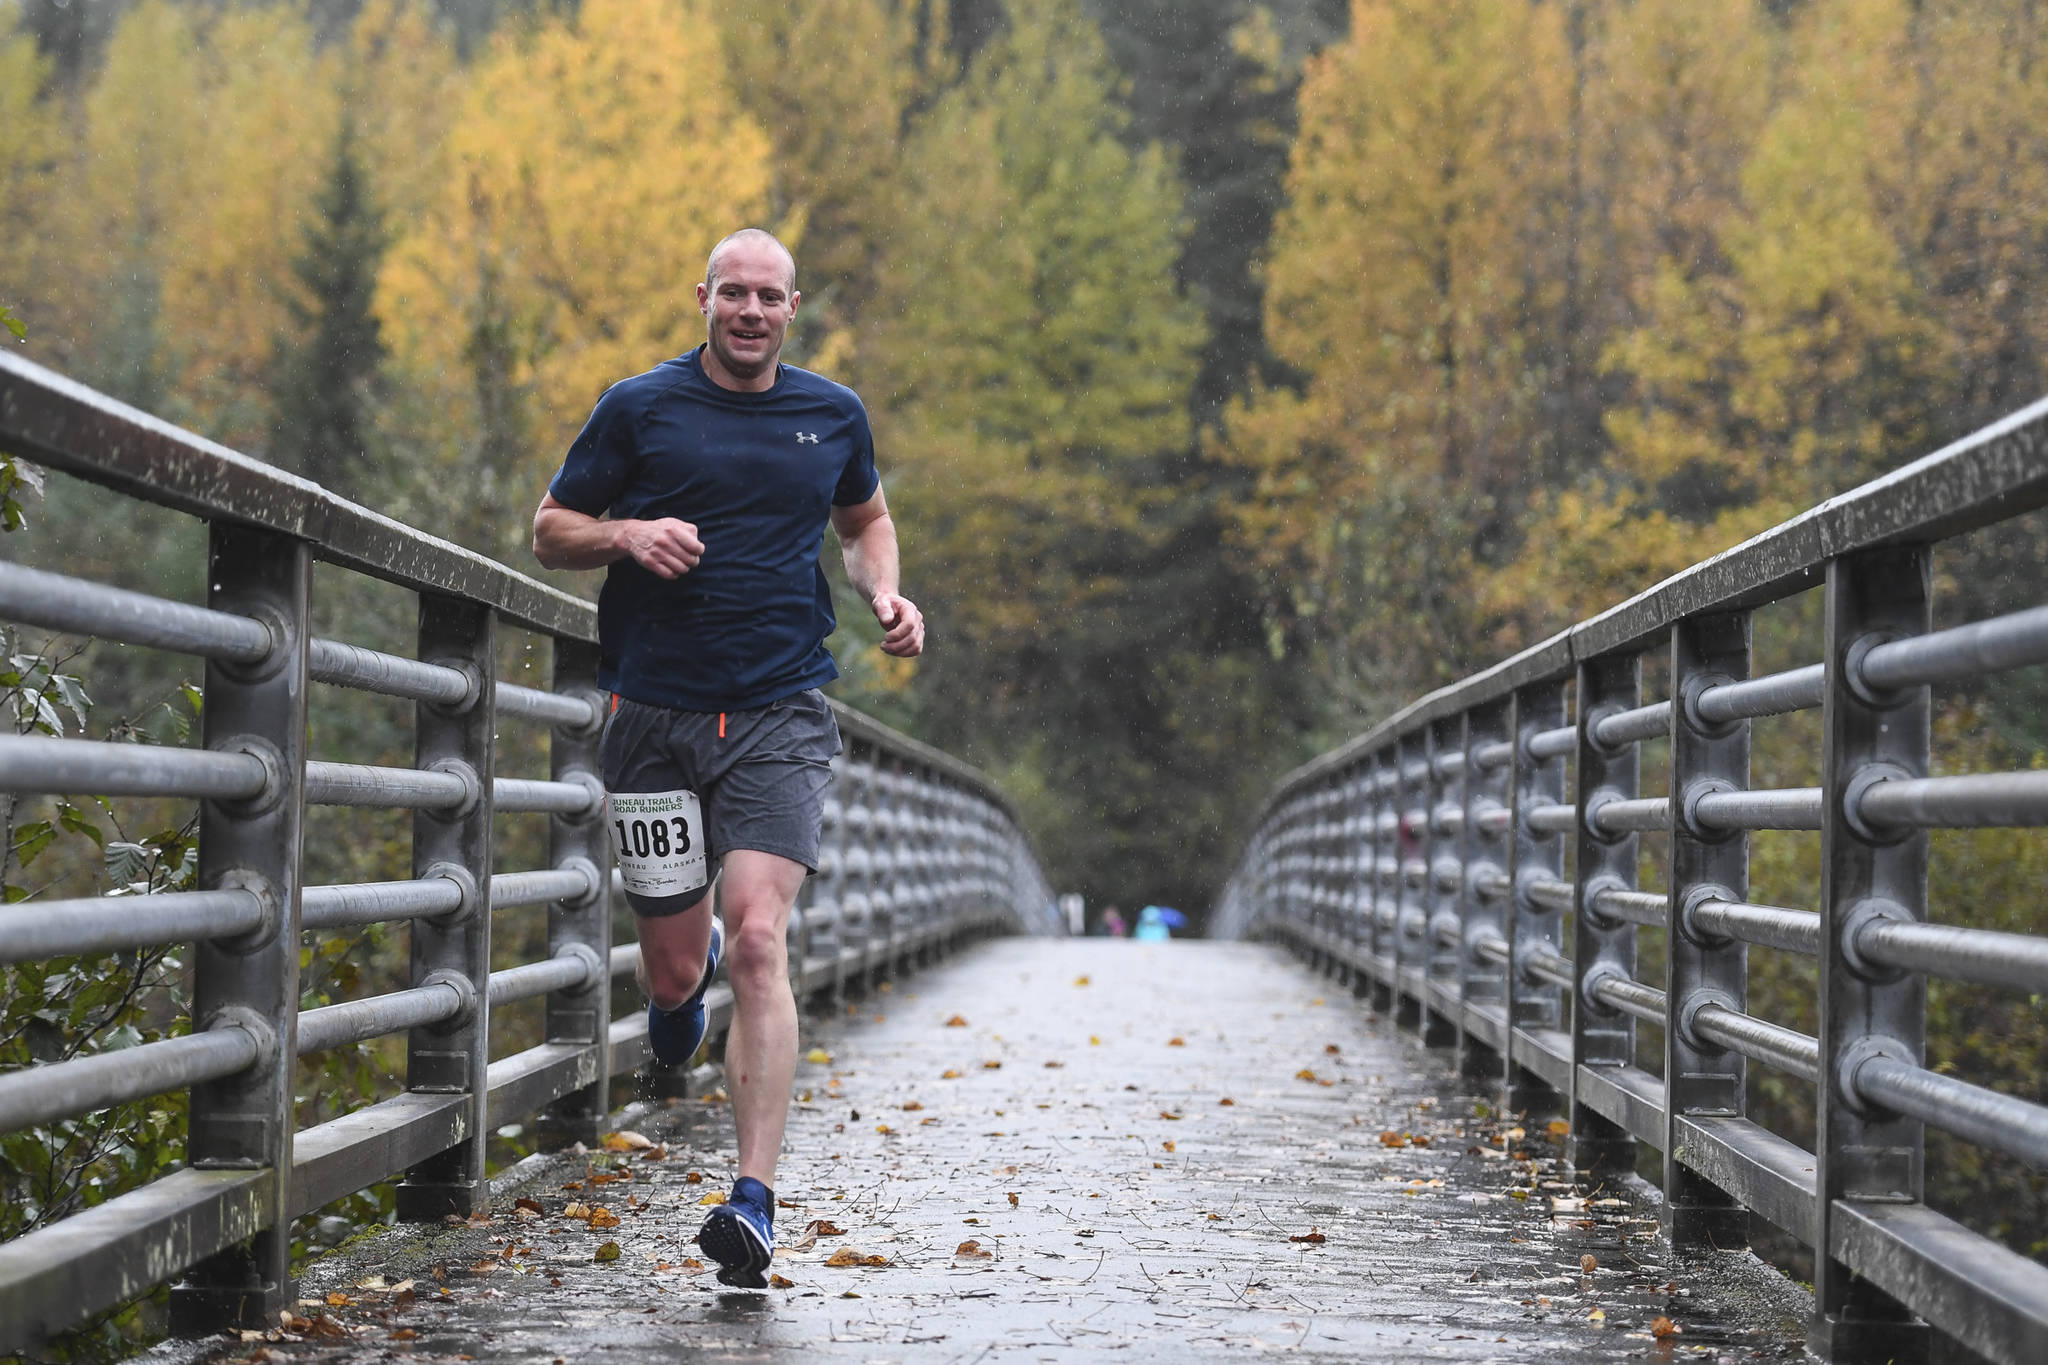 Brandon Ivanowicz takes the lead in the annual community mental health run, the Extra Tough 5K & 1 Mile Run, on Saturday, Oct. 12, 2019, at Riverbend Elementary School. The run is sponsored by National Alliance on Mental Illness (NAMI) Juneau. (Michael Penn | Juneau Empire)